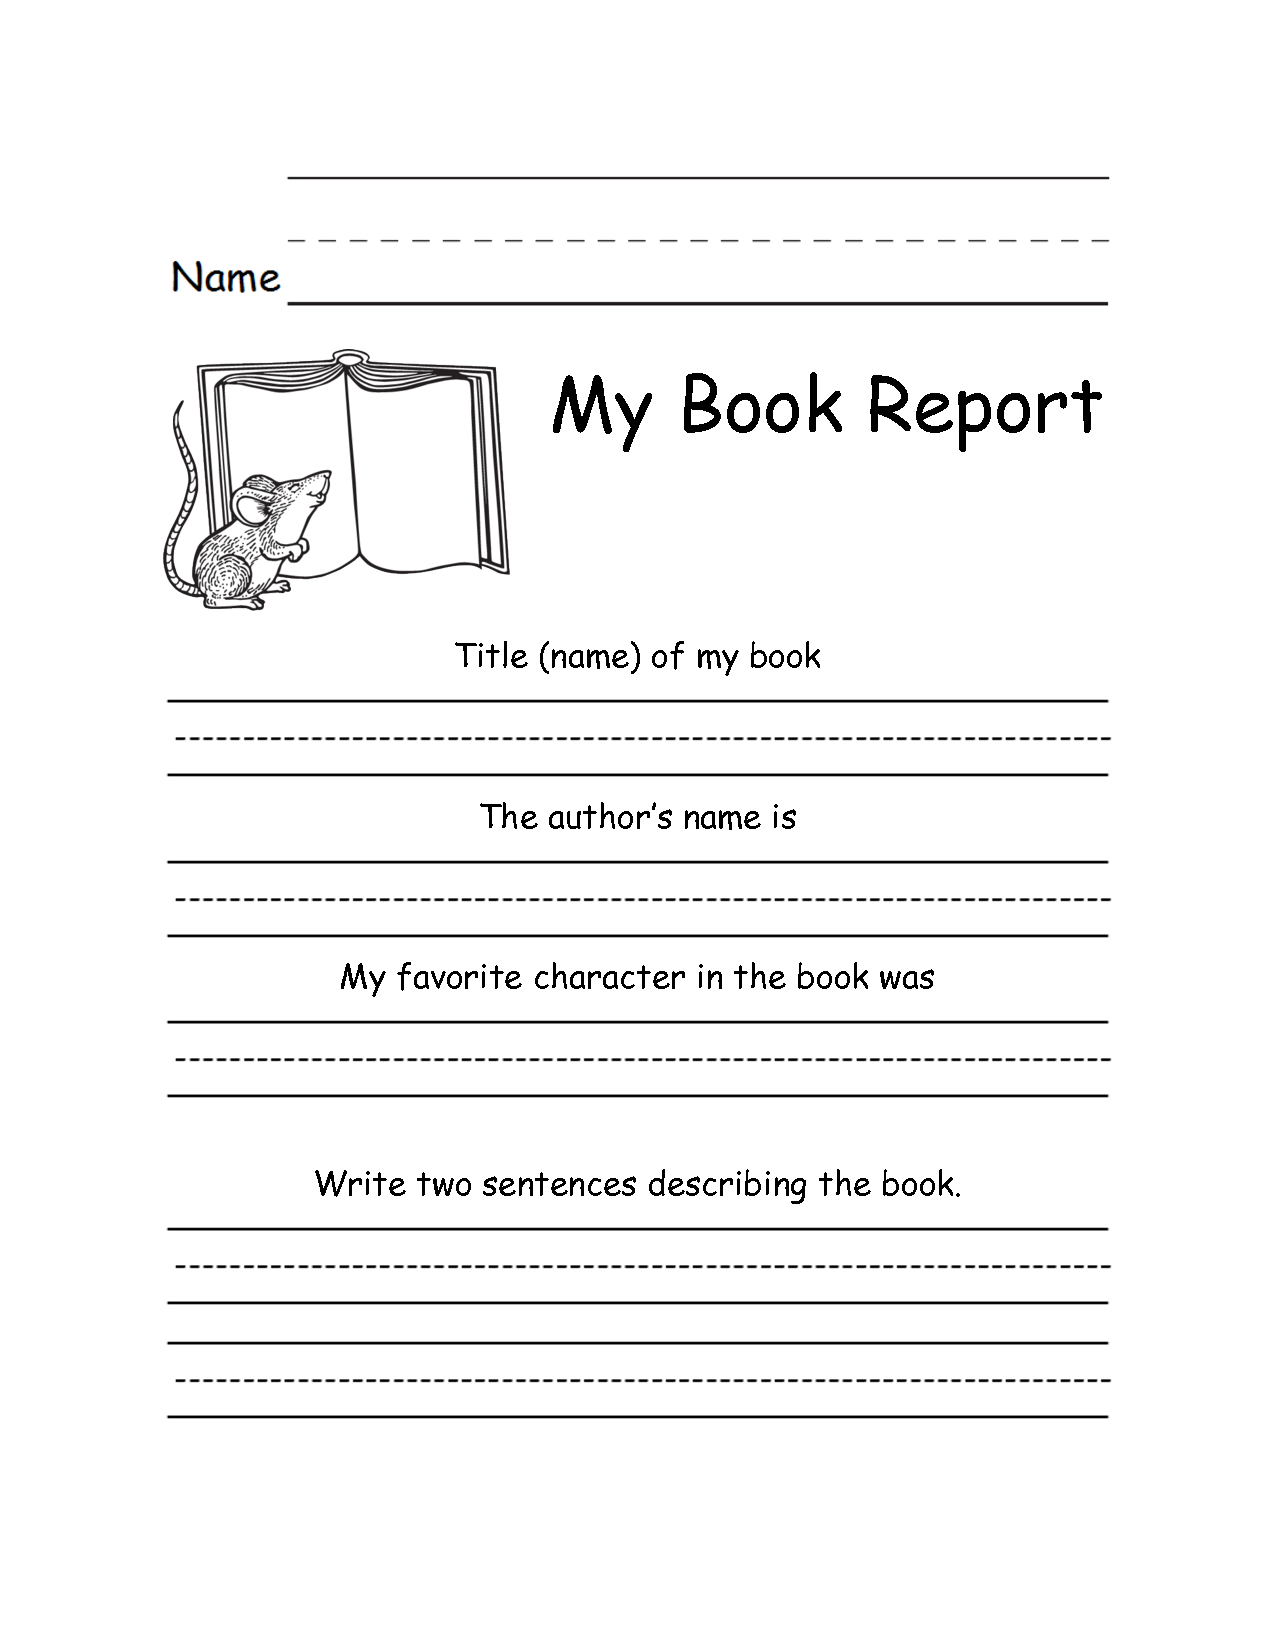 Outline of book report for elementary